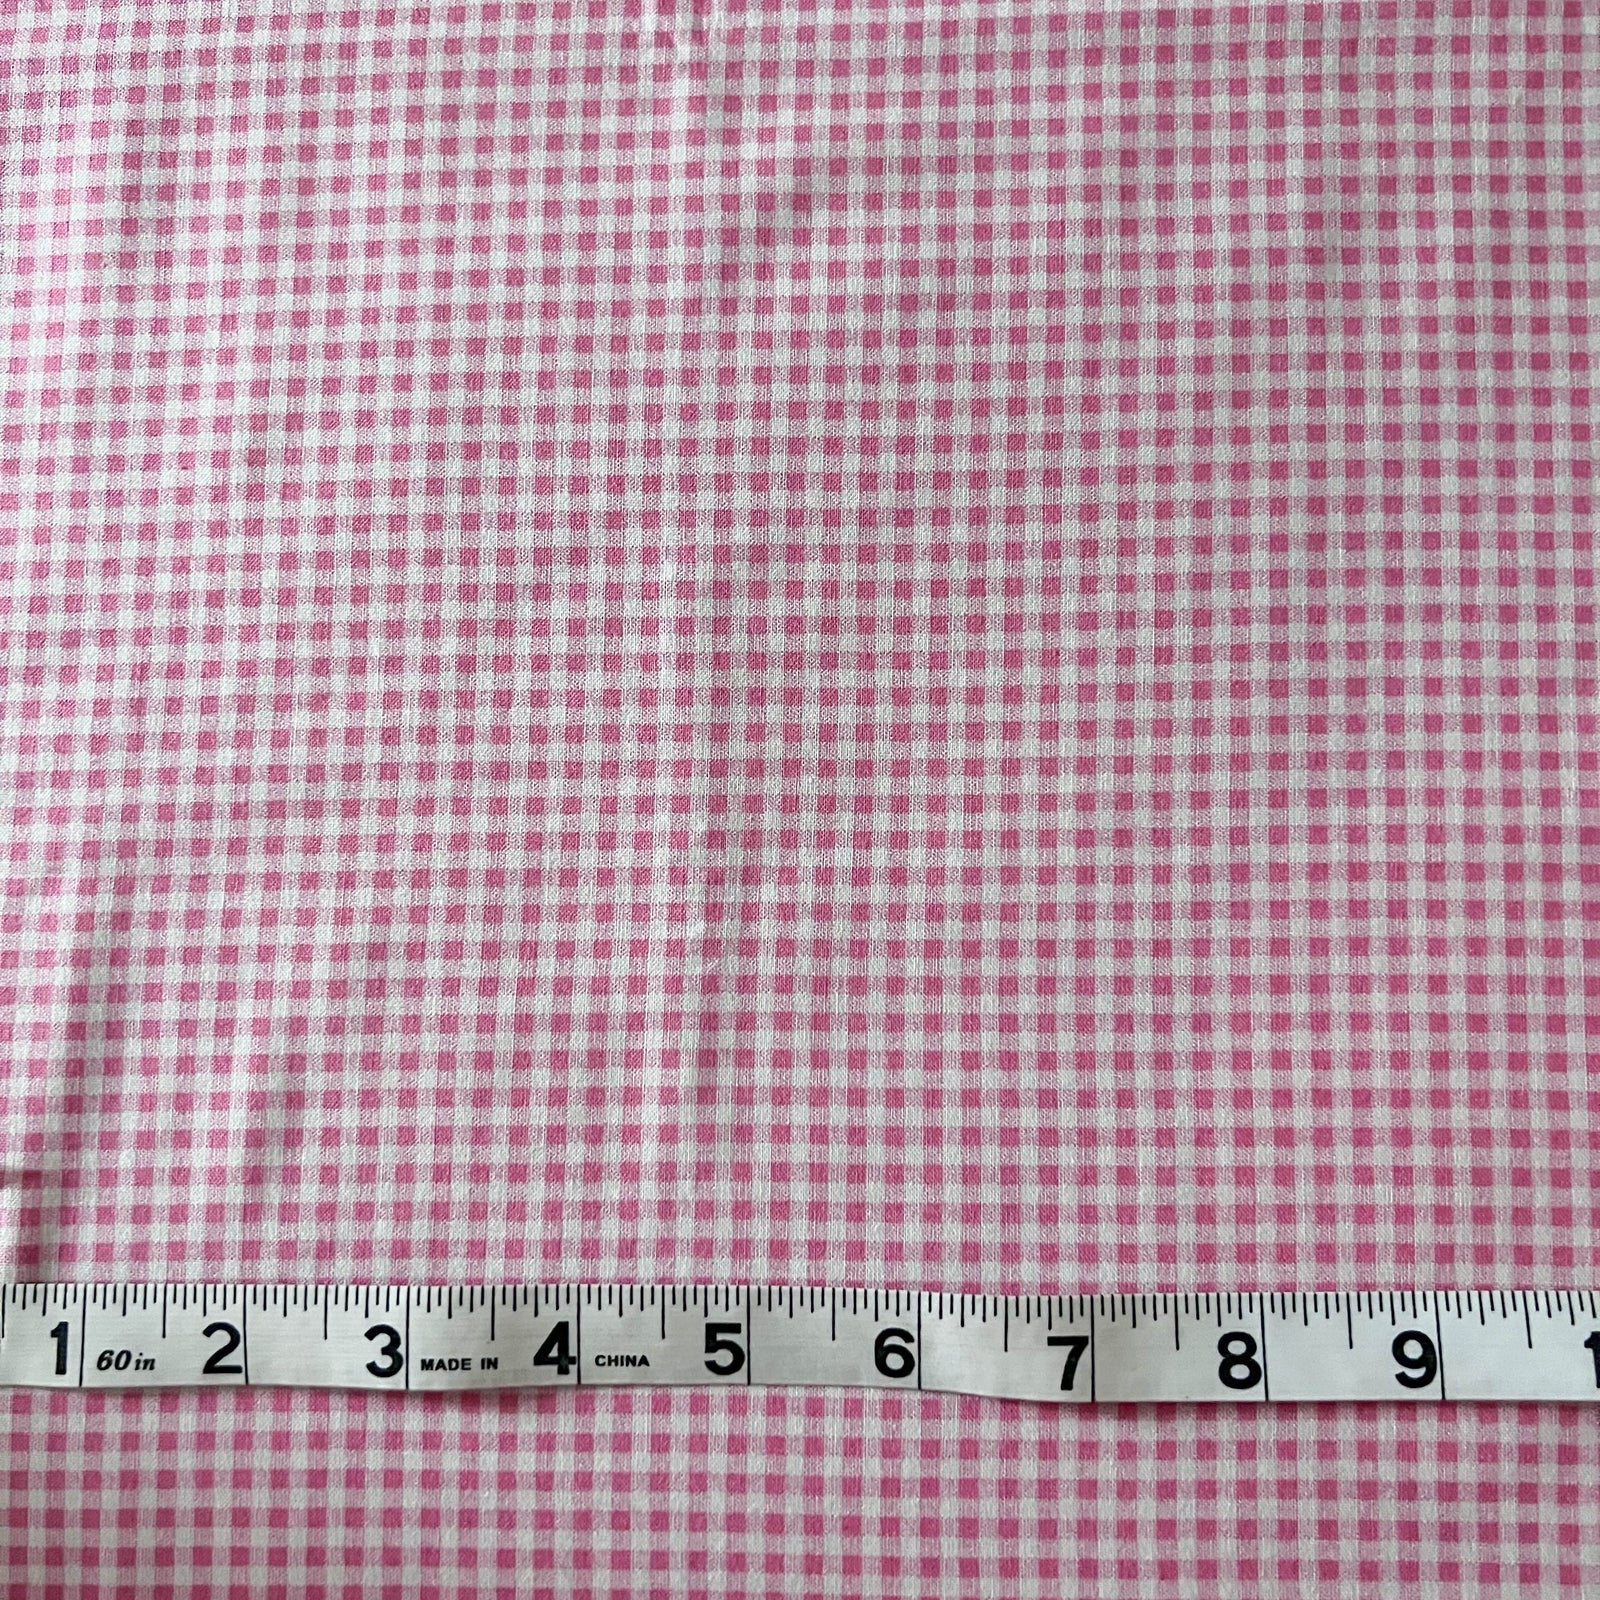 Pink Mini Gingham Cotton Fabric from Lecien Color Basic Collection - 1 yard